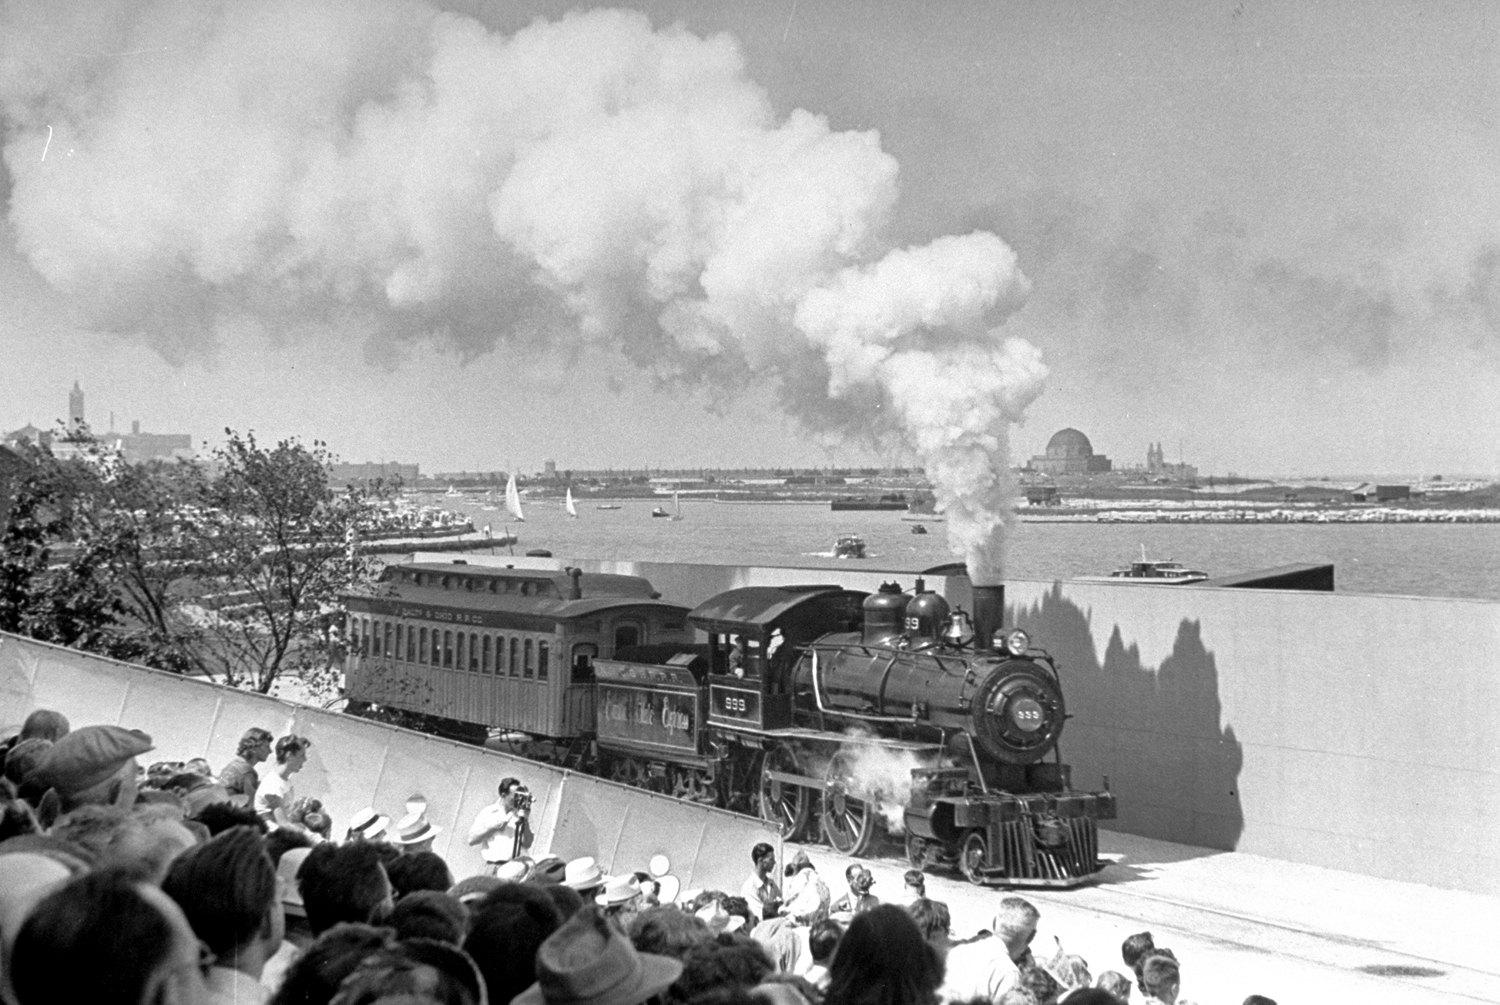 The Empire State Express at the Chicago Railroad Fair, 1948.